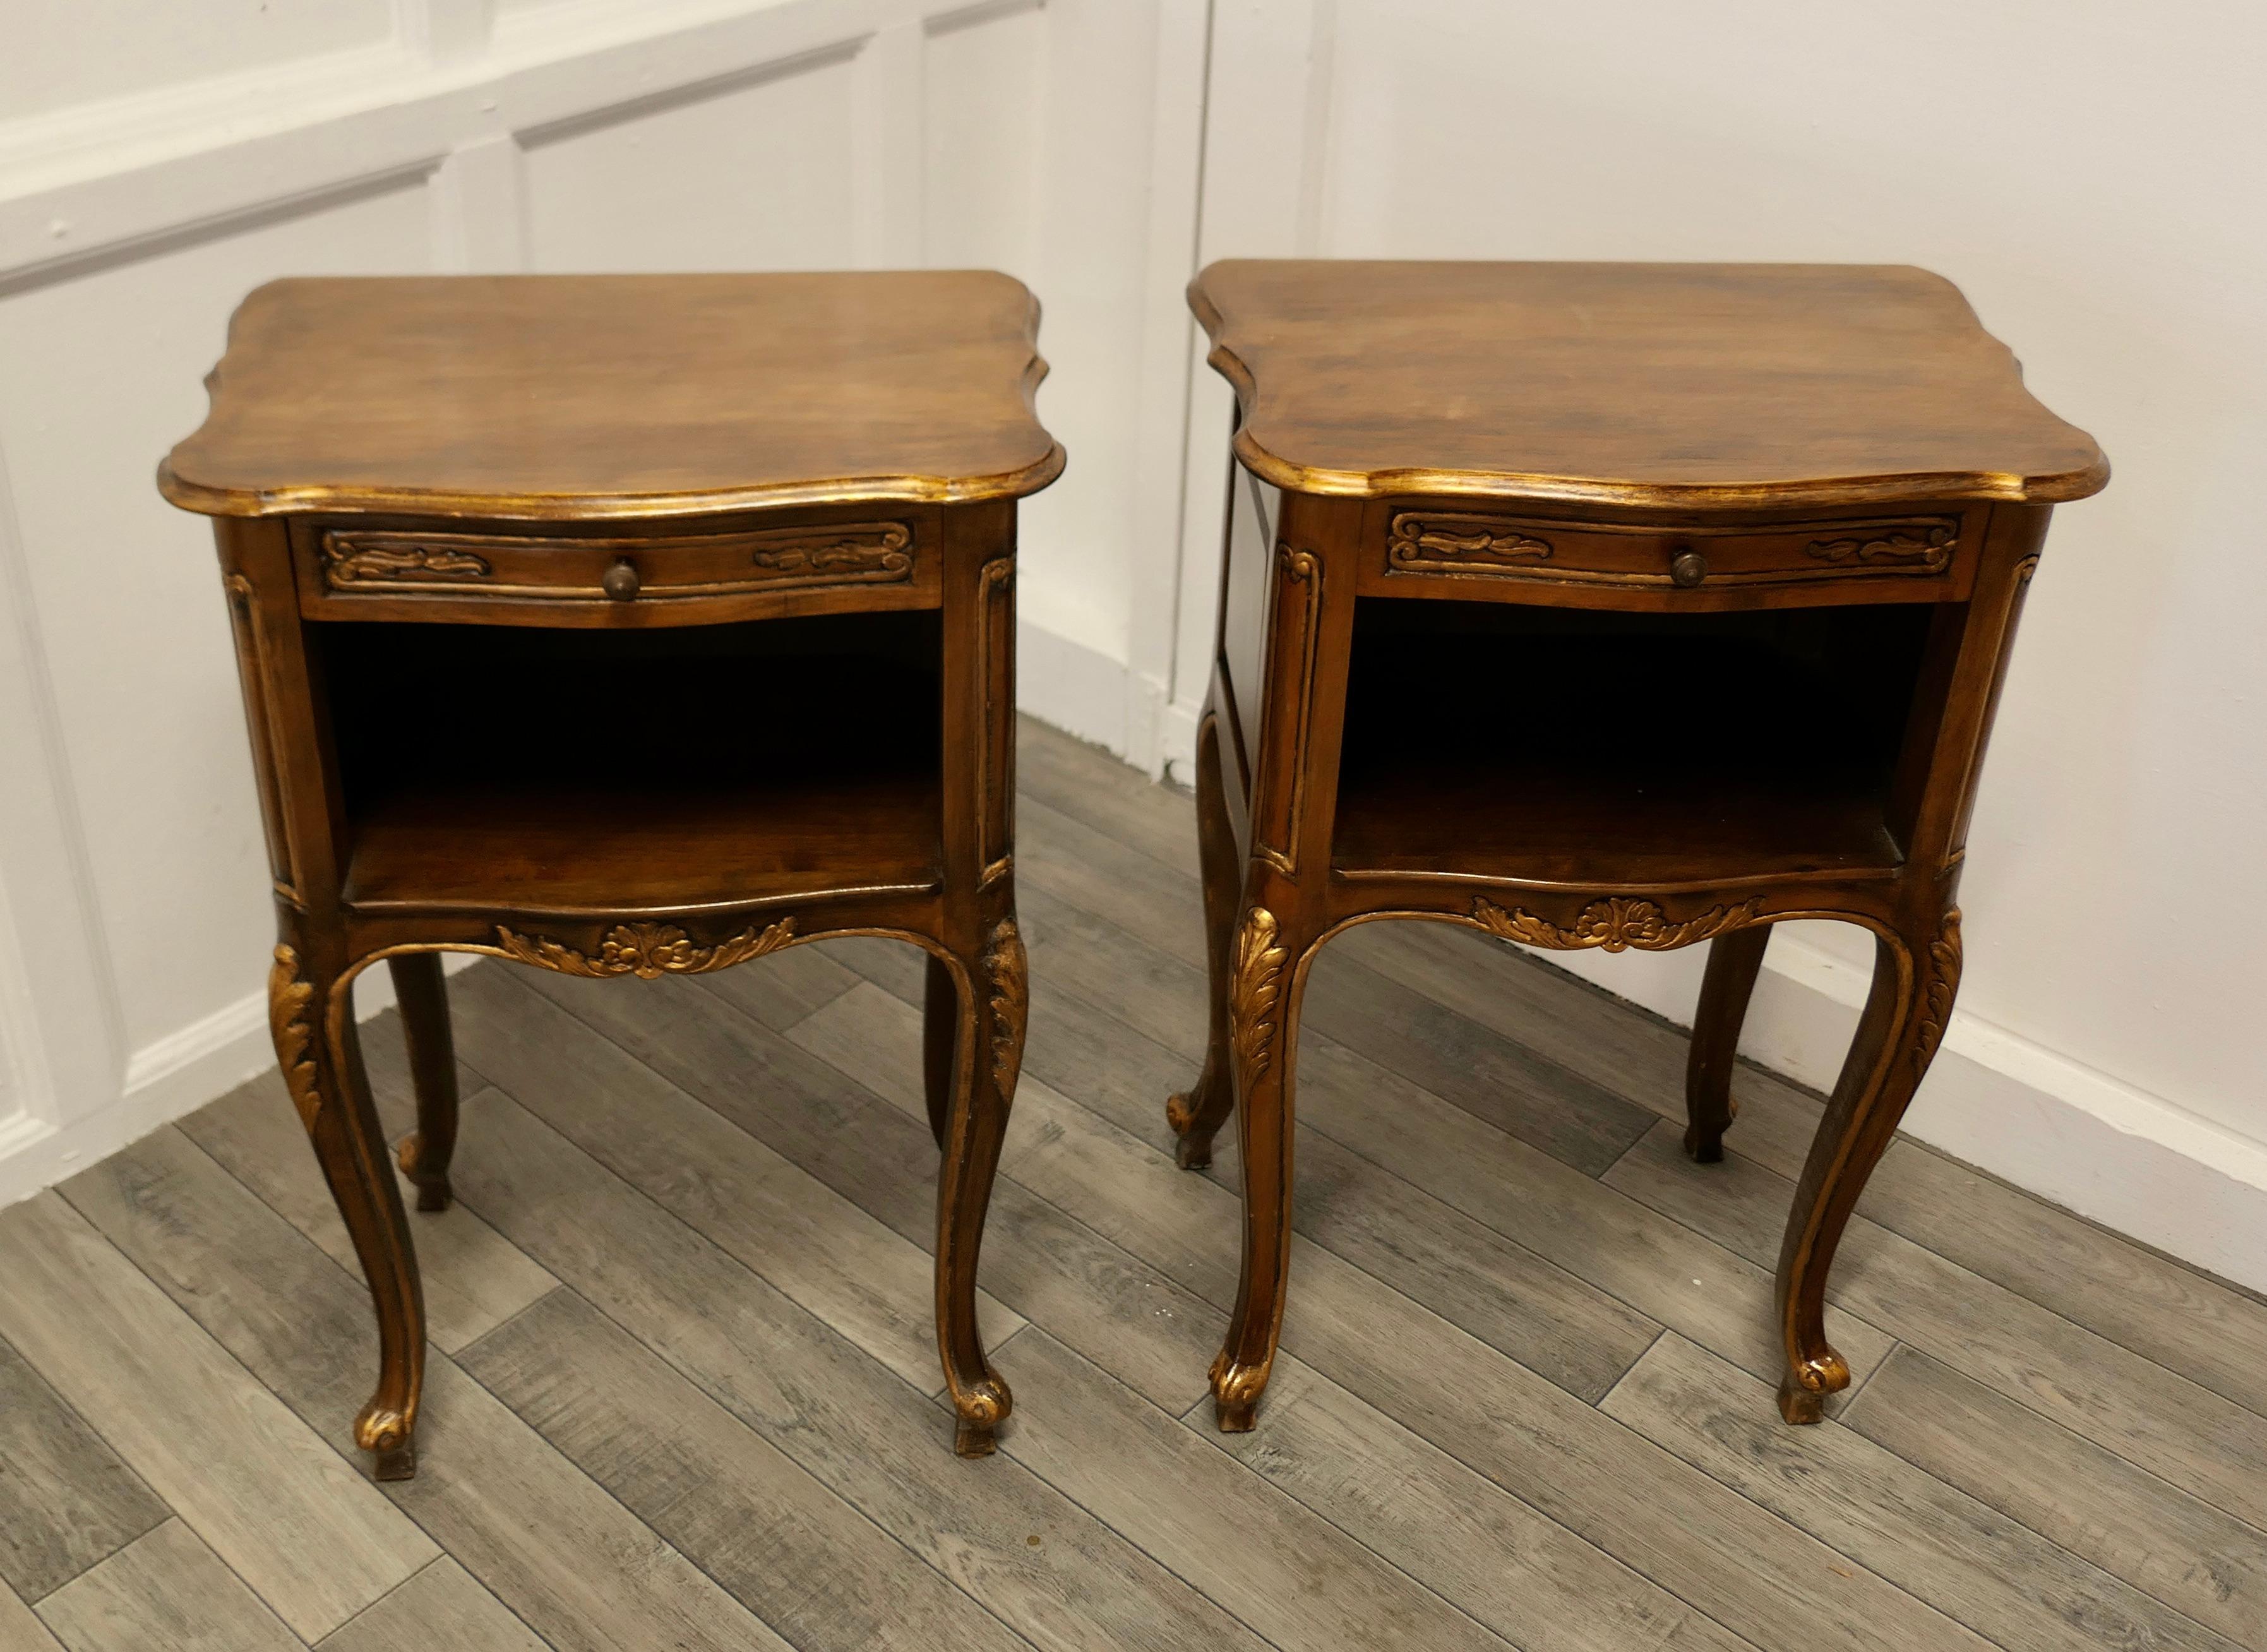 Mid-20th Century Pair of French Walnut Gilt Bedside Cabinets     